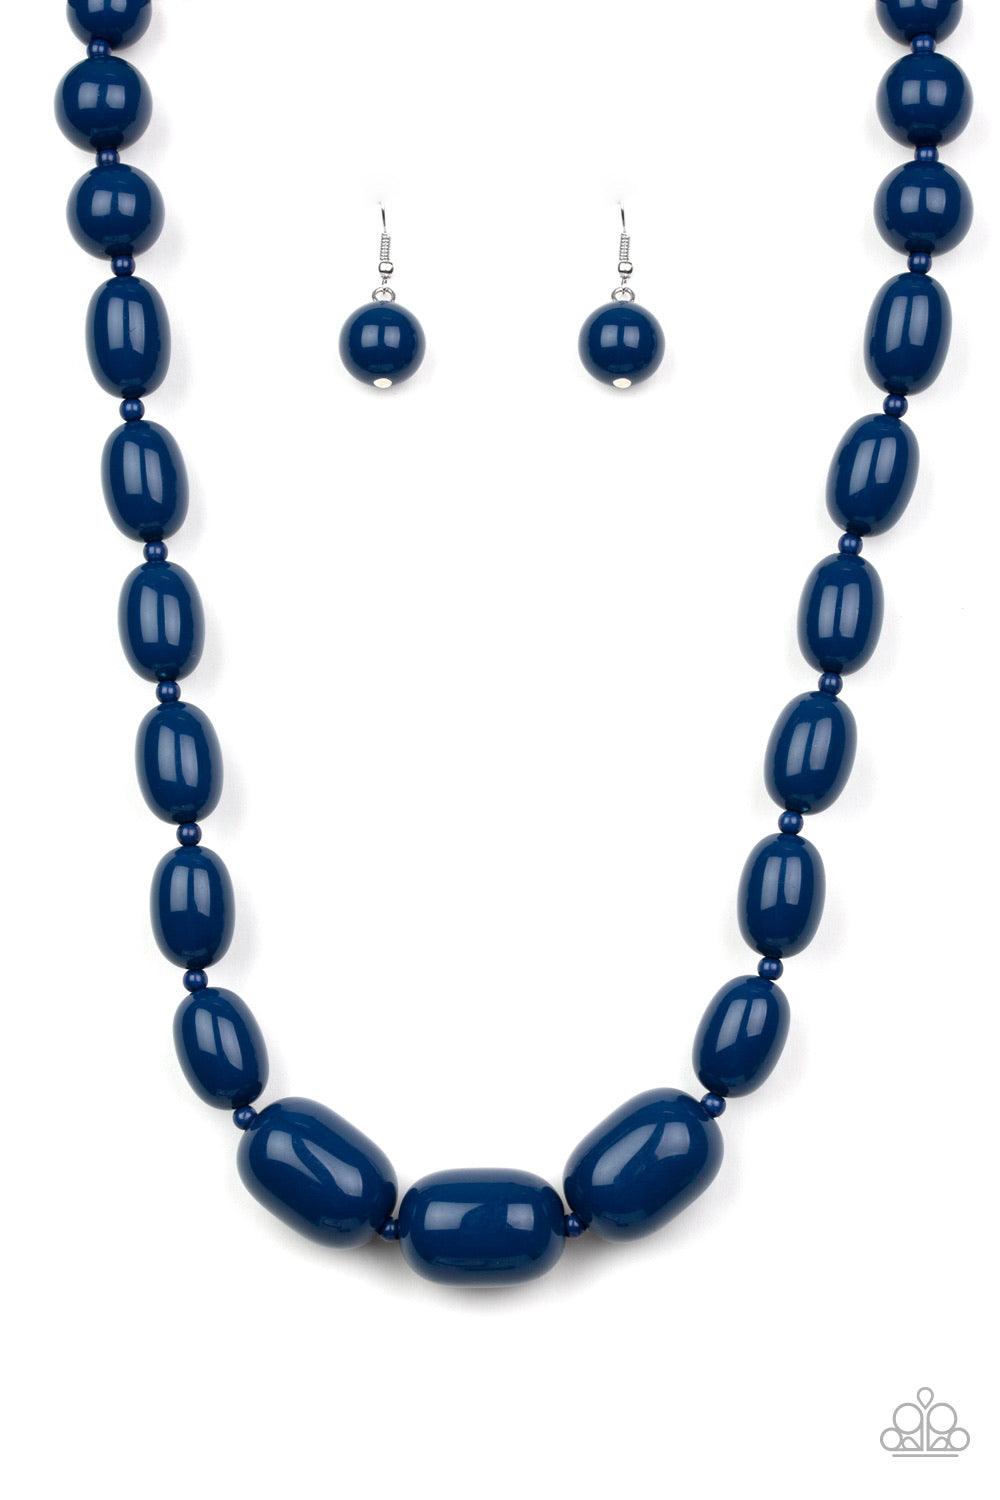 Paparazzi Accessories Poppin Popularity - Blue Infused with dainty Evening Blue beads, round Evening Blue beads trickle into bold oval beads, creating a bold pop of color below the collar. Features an adjustable clasp closure. Jewelry